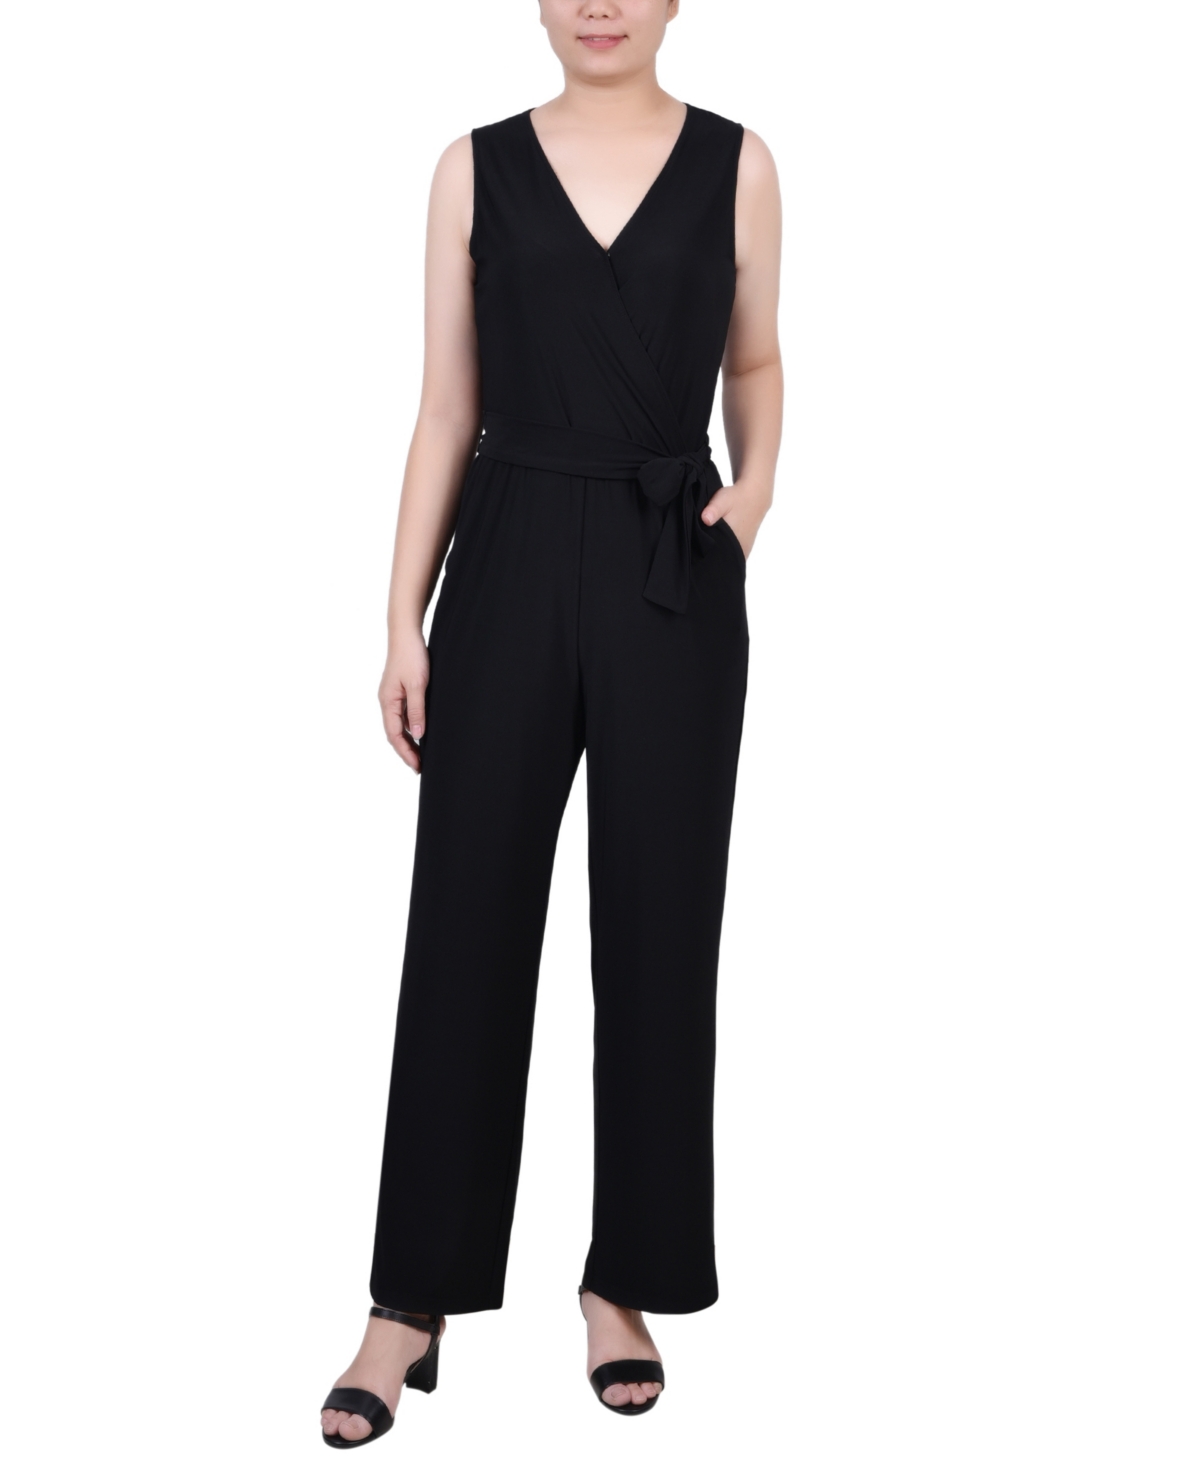 NY COLLECTION PETITE SHORT SLEEVELESS BELTED JUMPSUIT